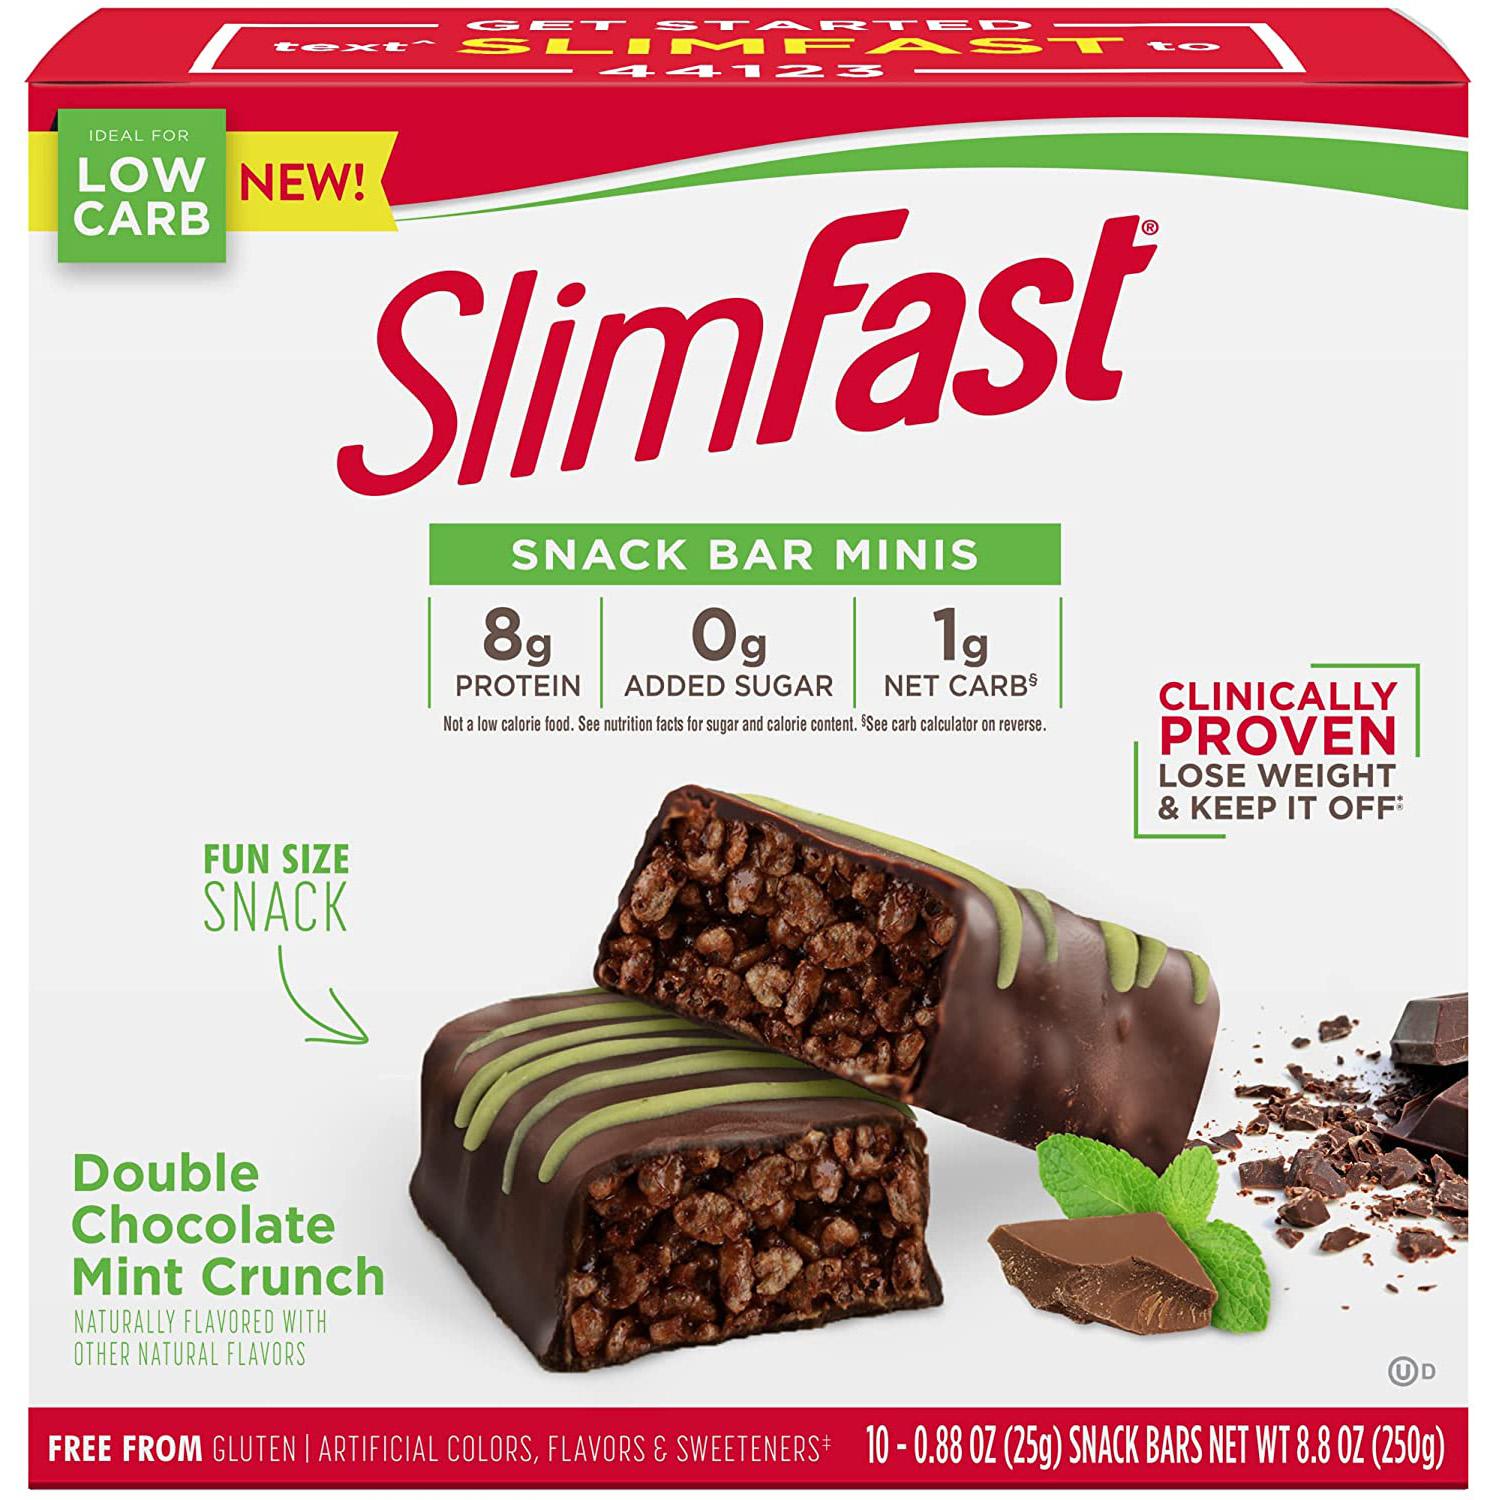 10 SlimFast Double Chocolate Mint Crunch Snack Bar Minis for $3.50 Shipped